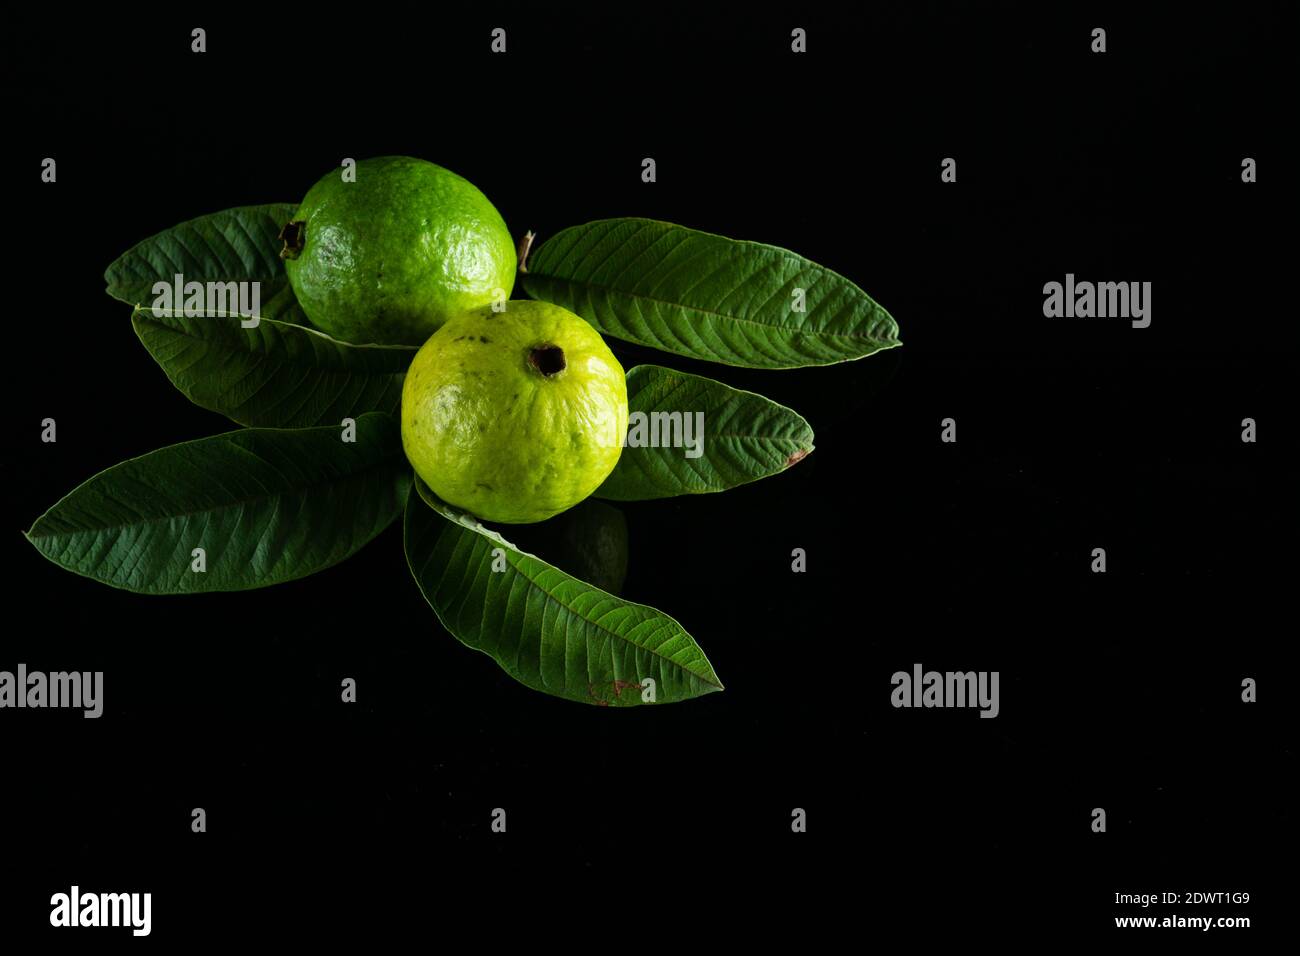 Fresh vitamin-rich Guava fruit and its leaves on a black background Stock Photo